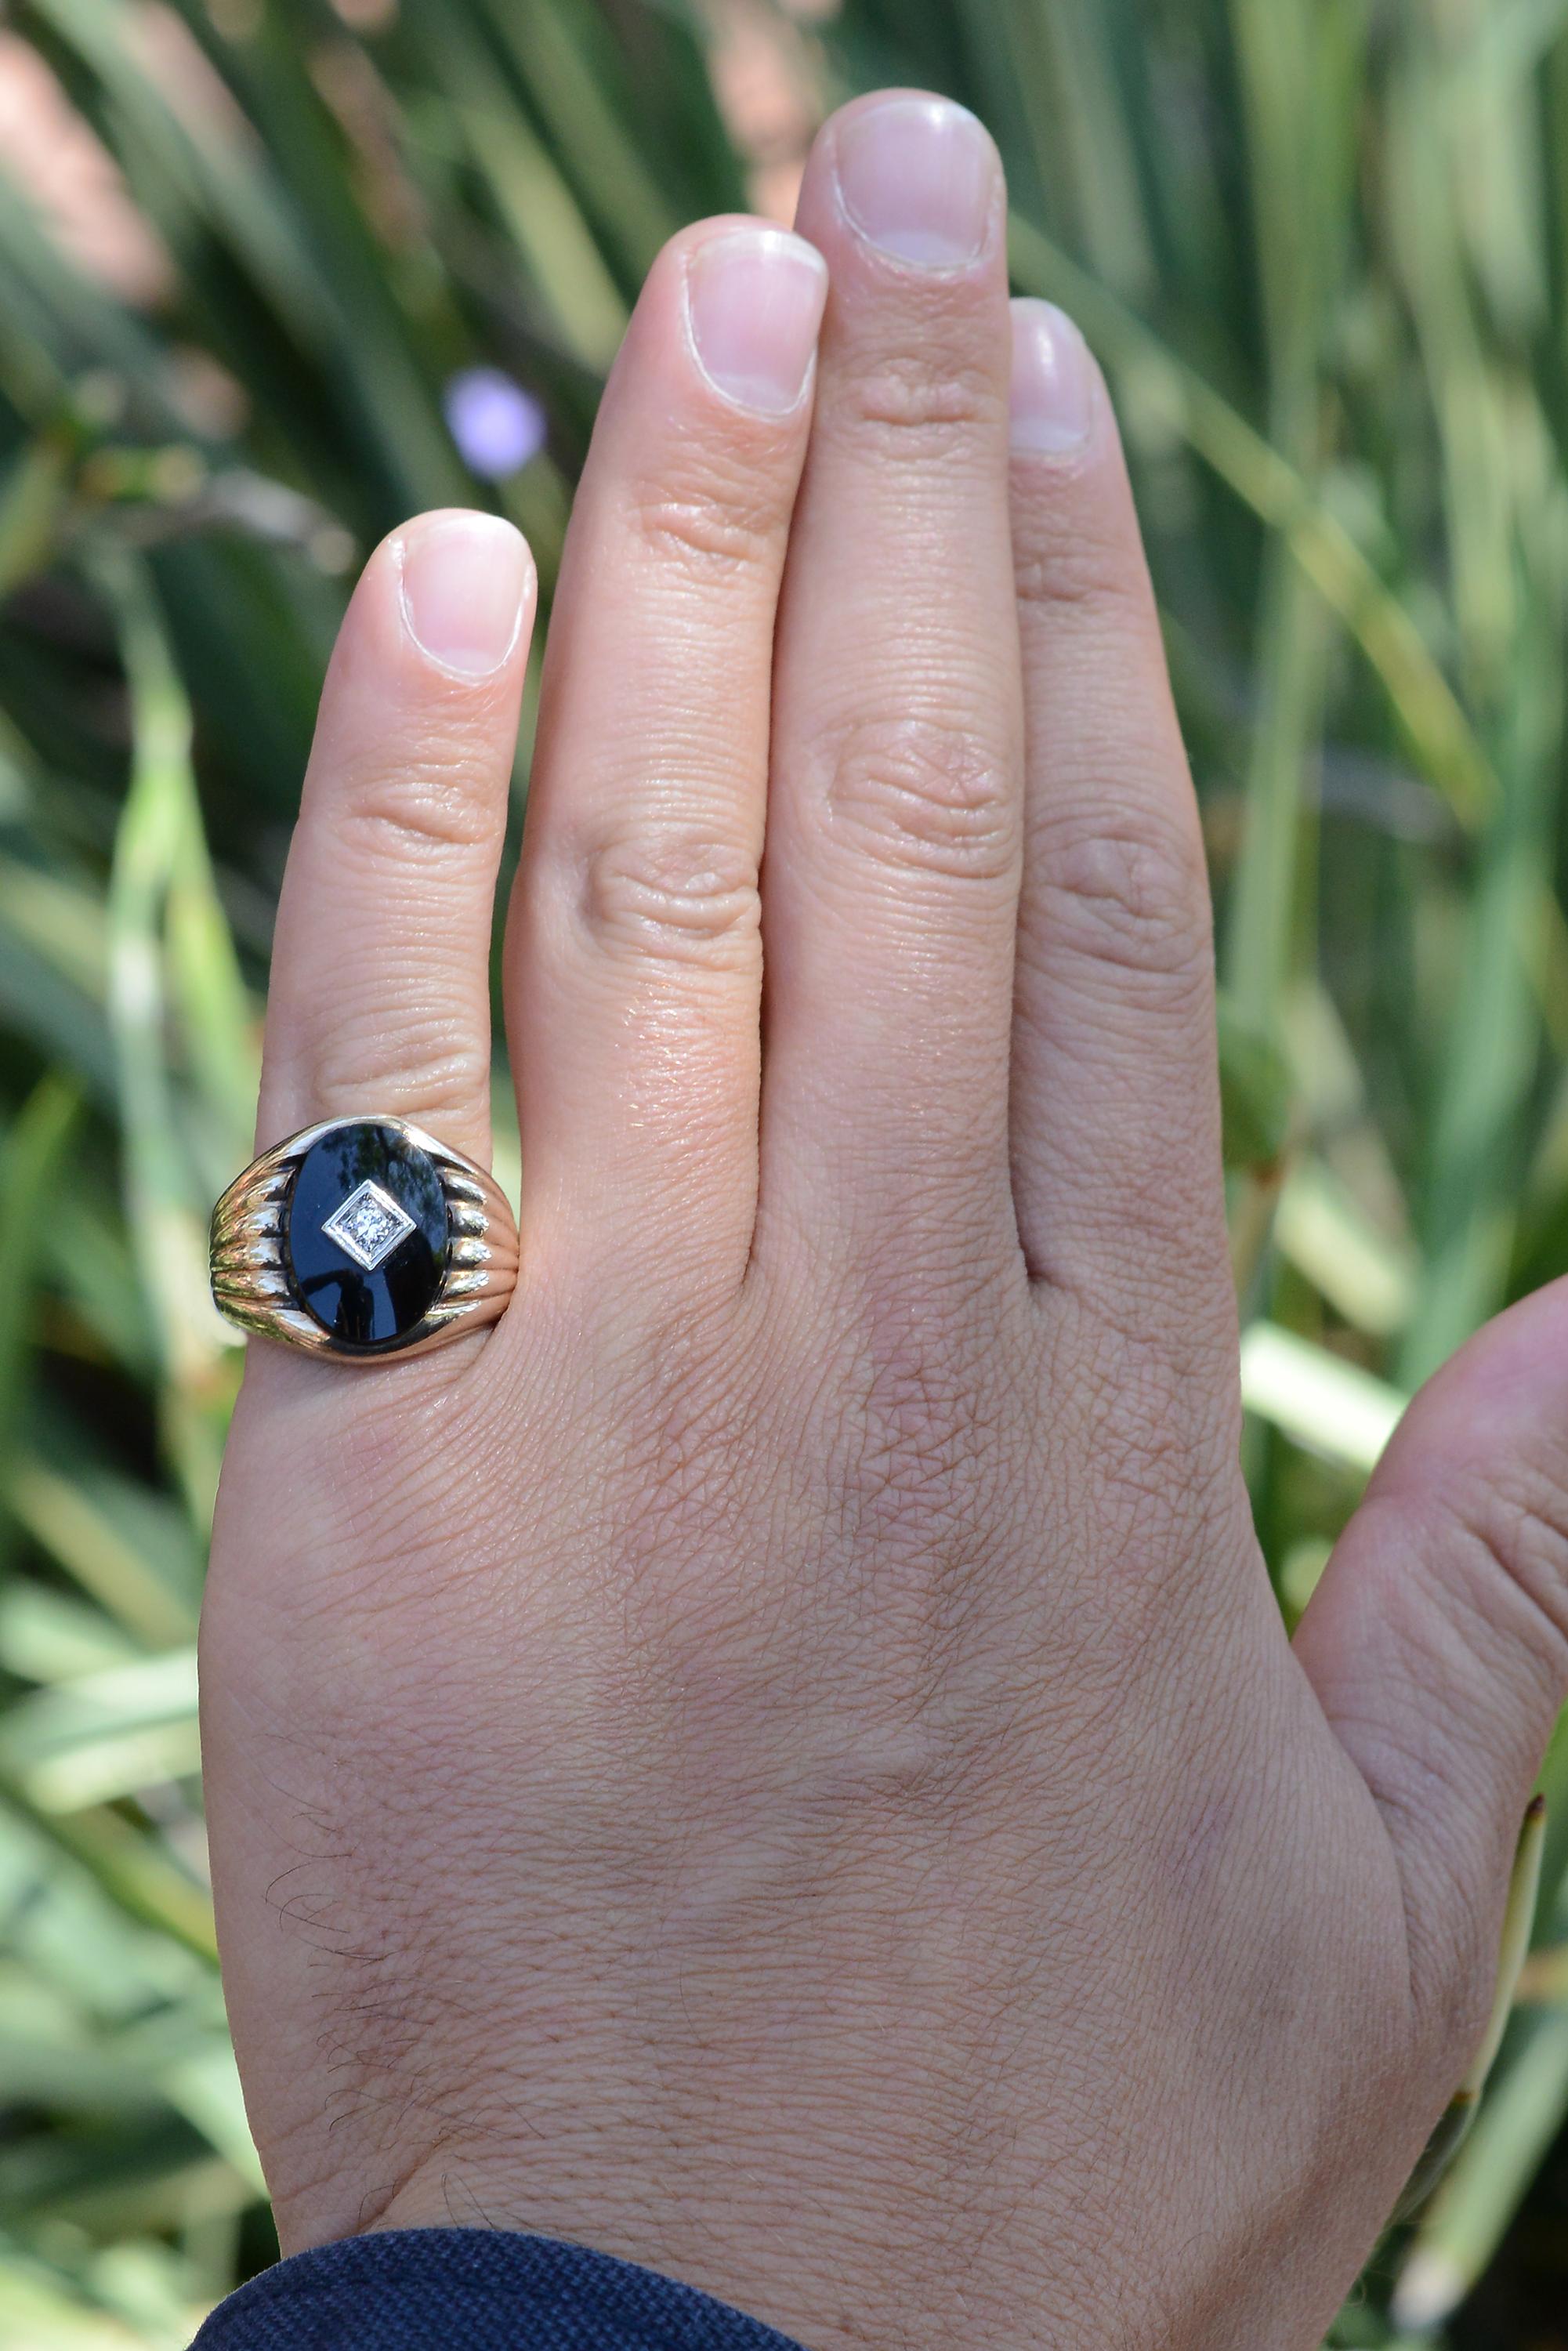 A classic vintage estate unisex black onyx and diamond cocktail ring. A fiery round brilliant diamond peers out from a skillfully polished oval onyx, excellently paired with a rich yellow gold band. The ring is both affordable and sustainable and